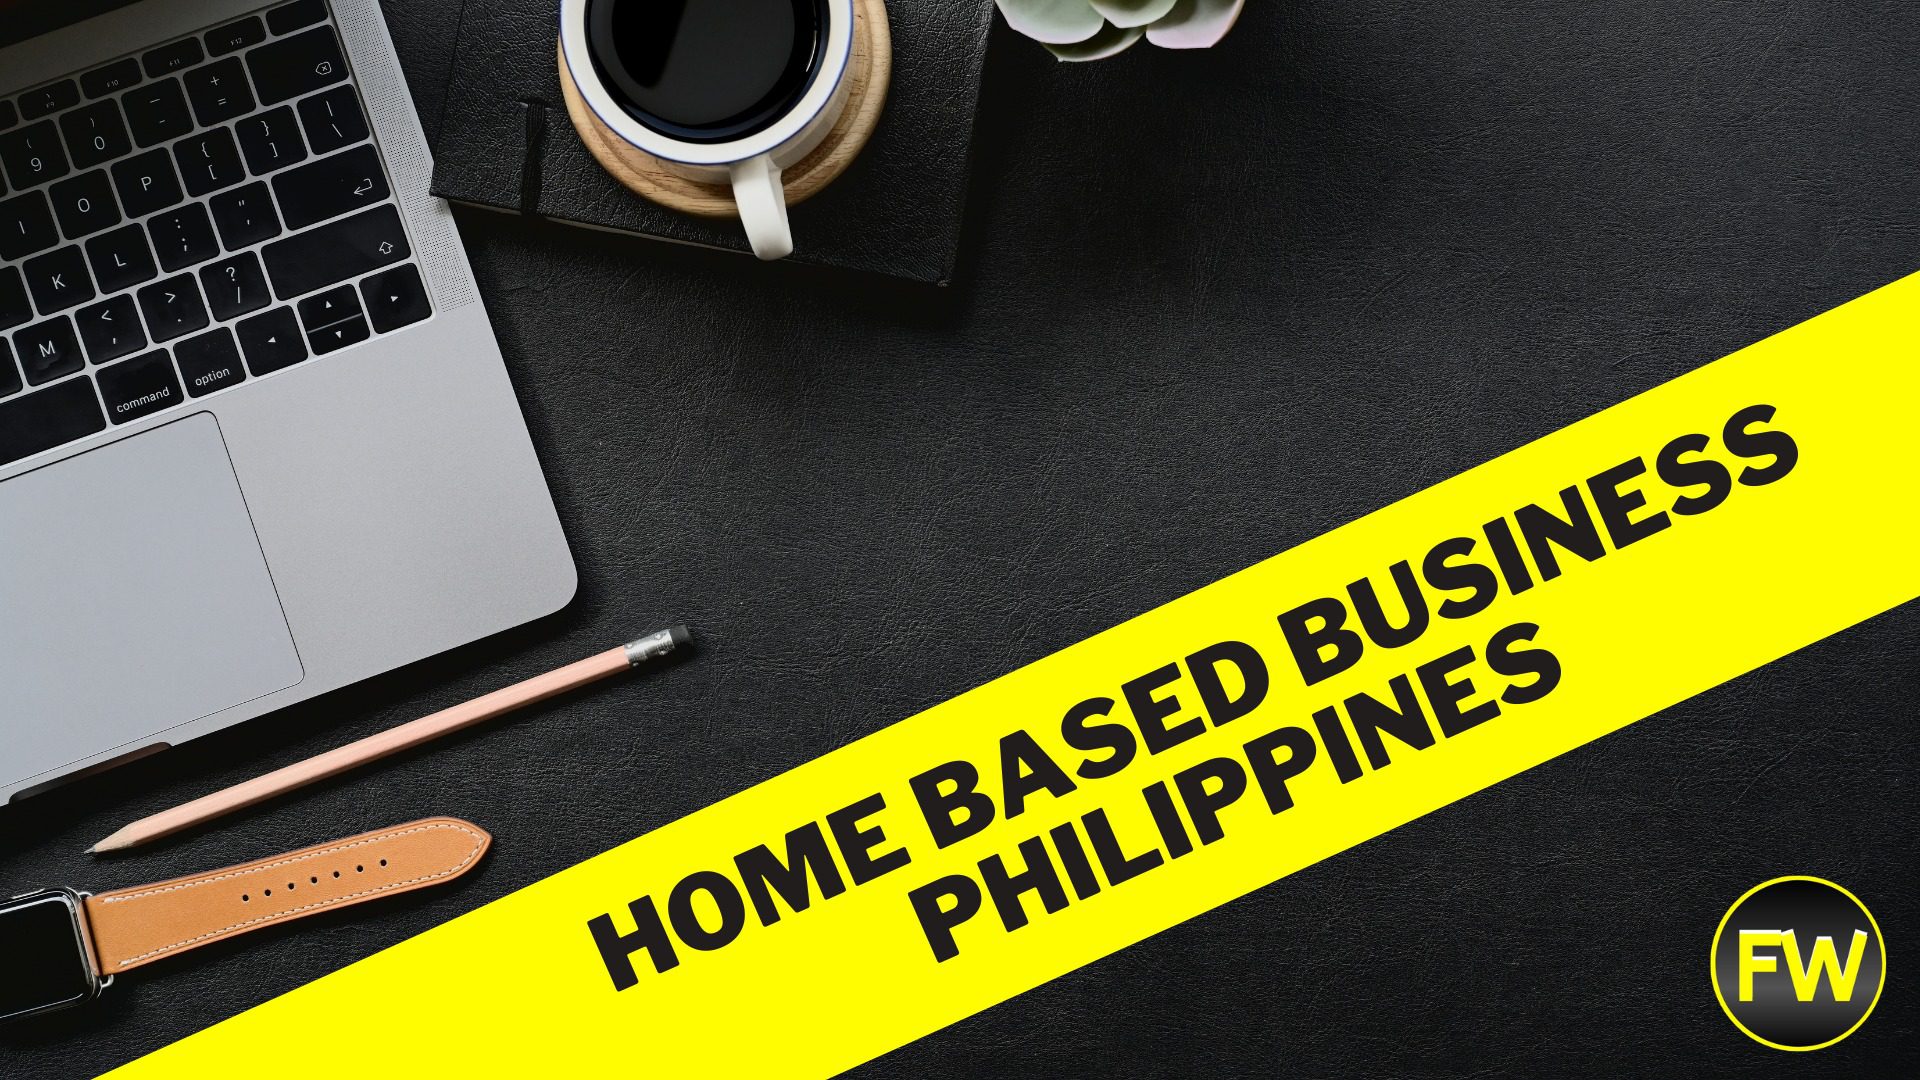 home based business ideas philippines